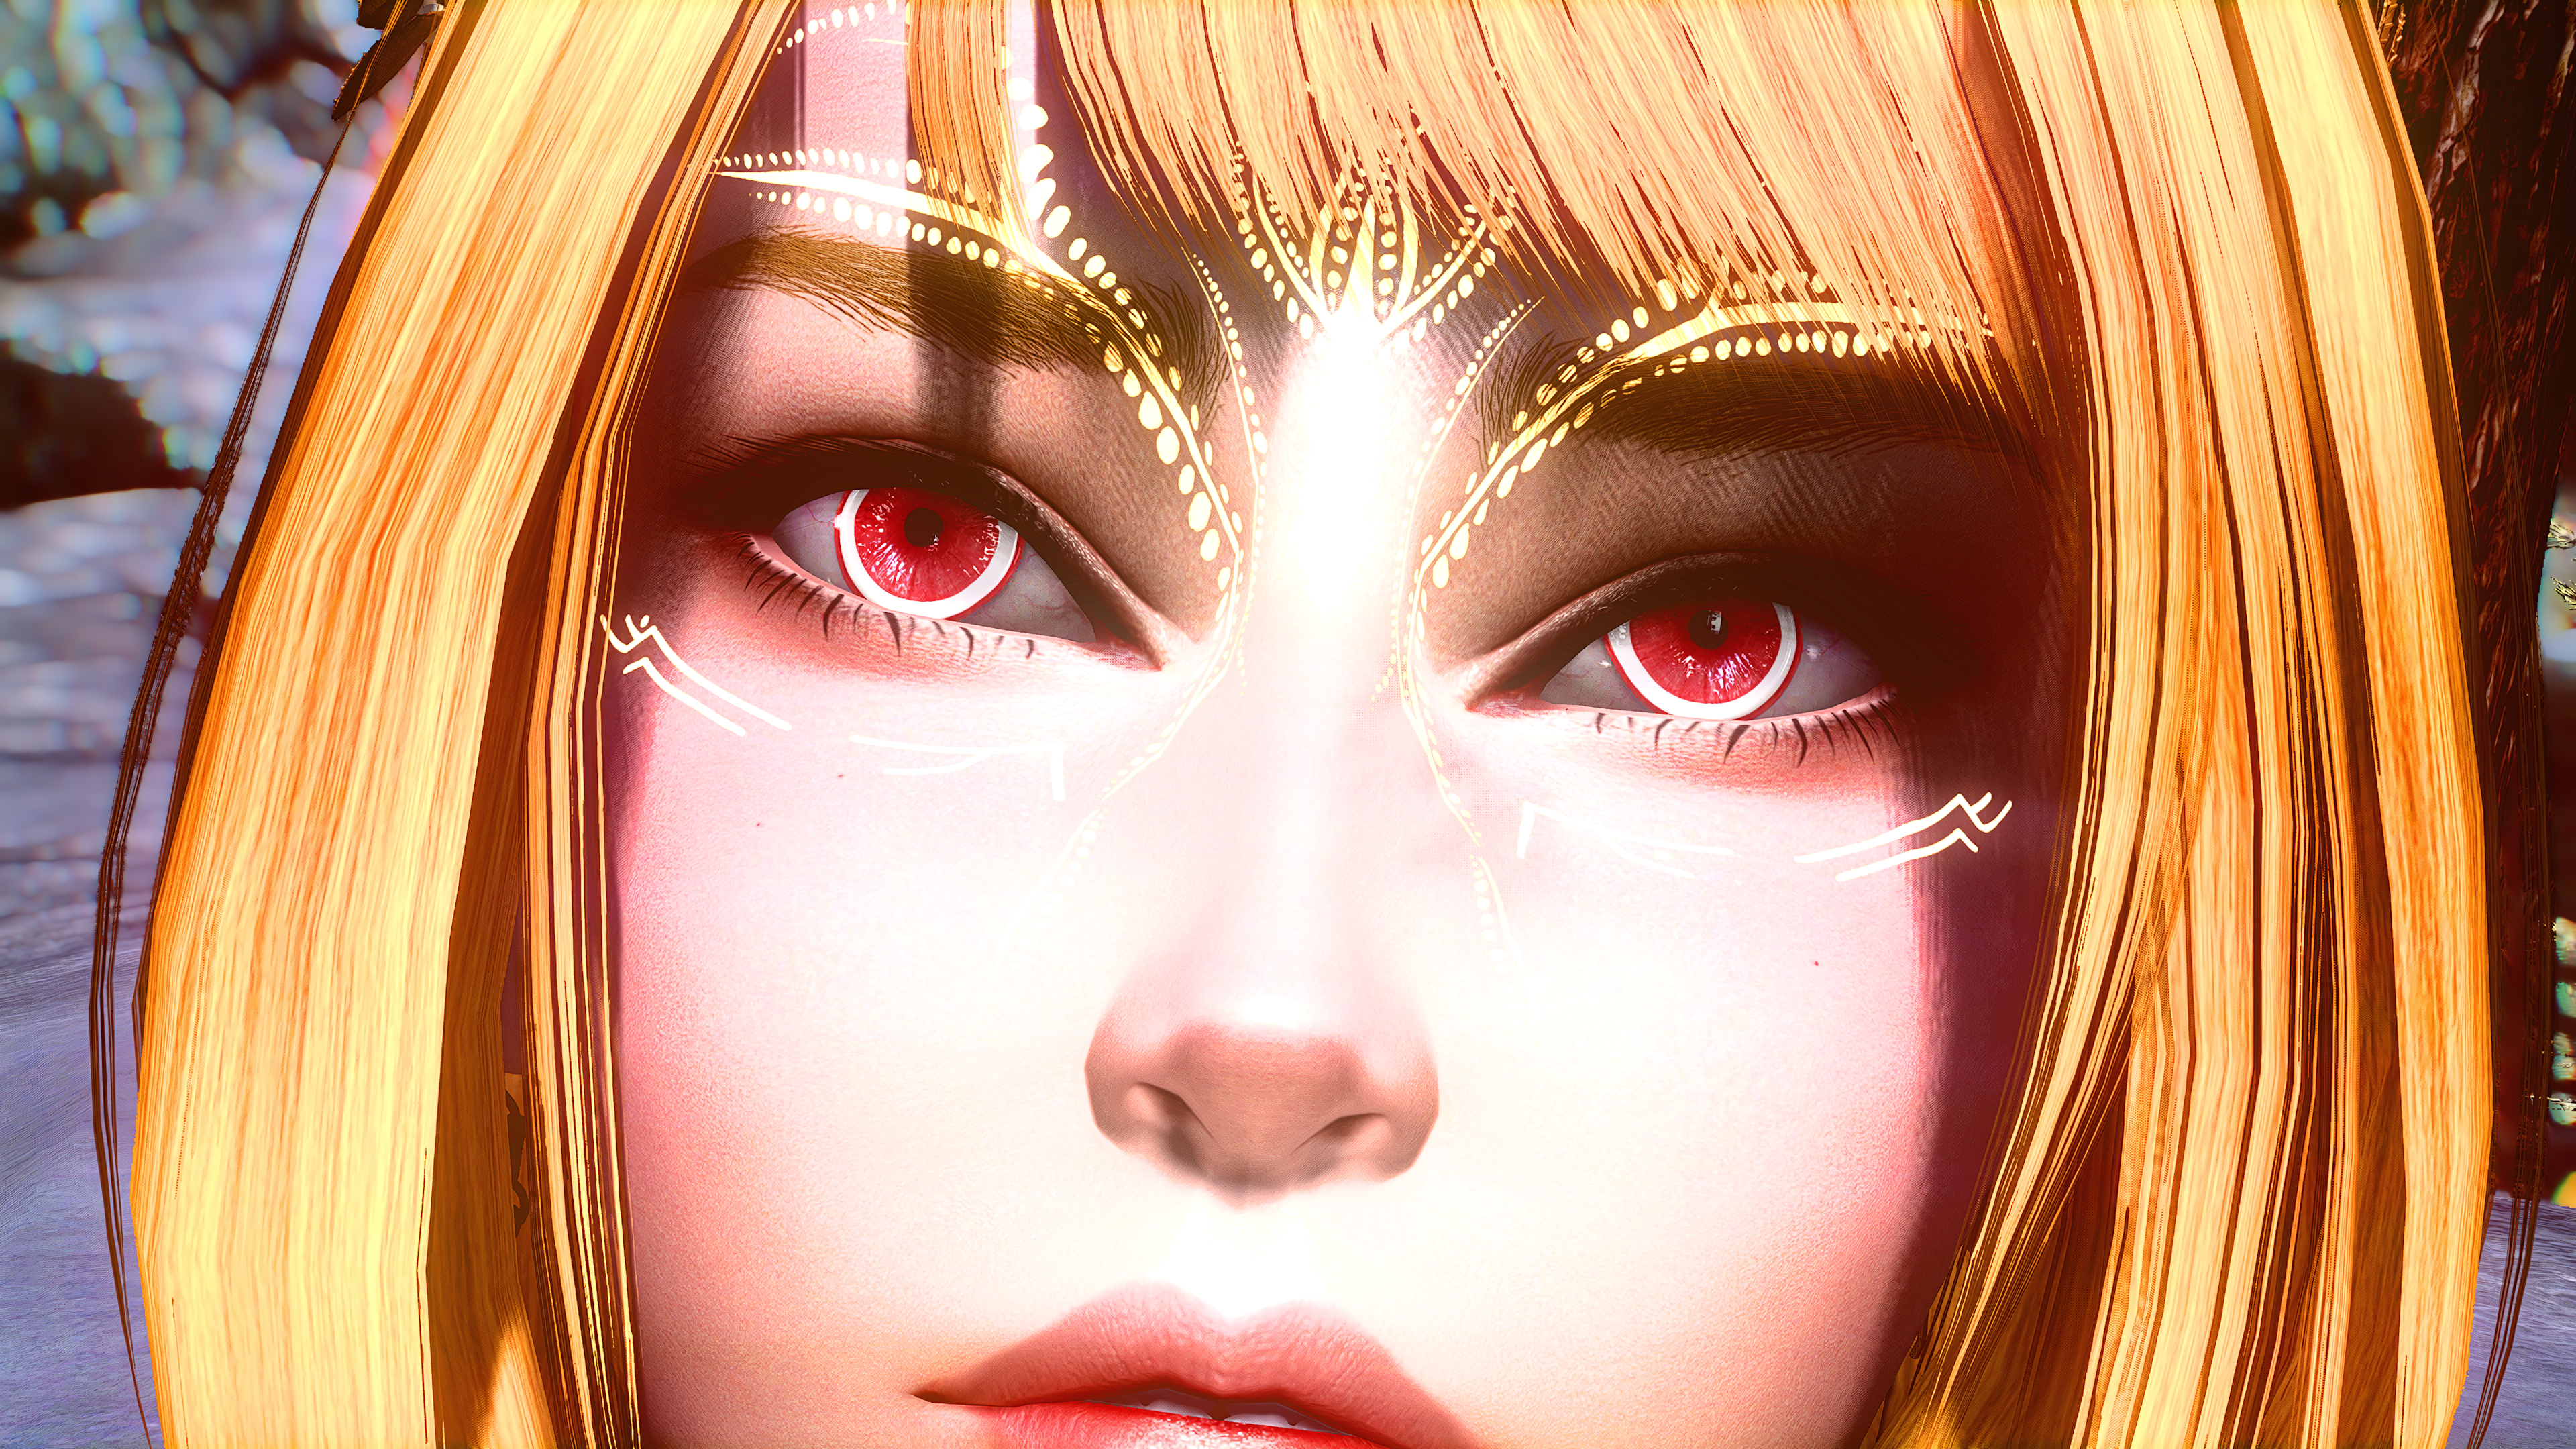 General 3840x2160 The Elder Scrolls V: Skyrim Bethesda Softworks video games closeup video game art face video game characters CGI screen shot blonde red eyes parted lips looking at viewer bright